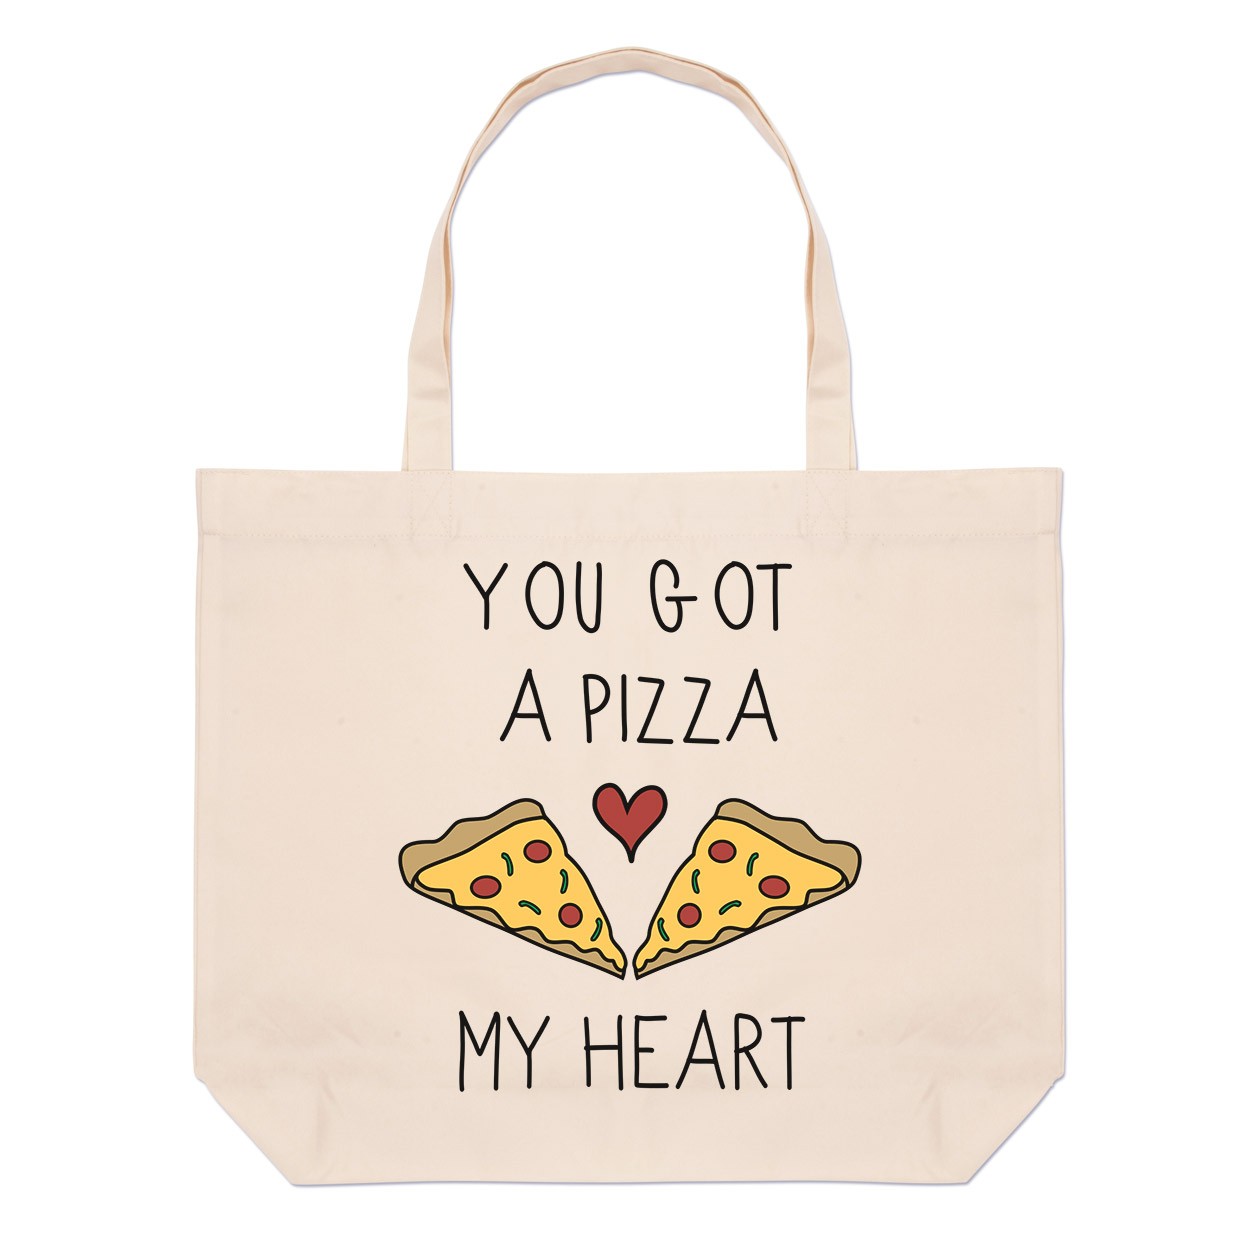 You Got A Pizza My Heart Large Beach Tote Bag